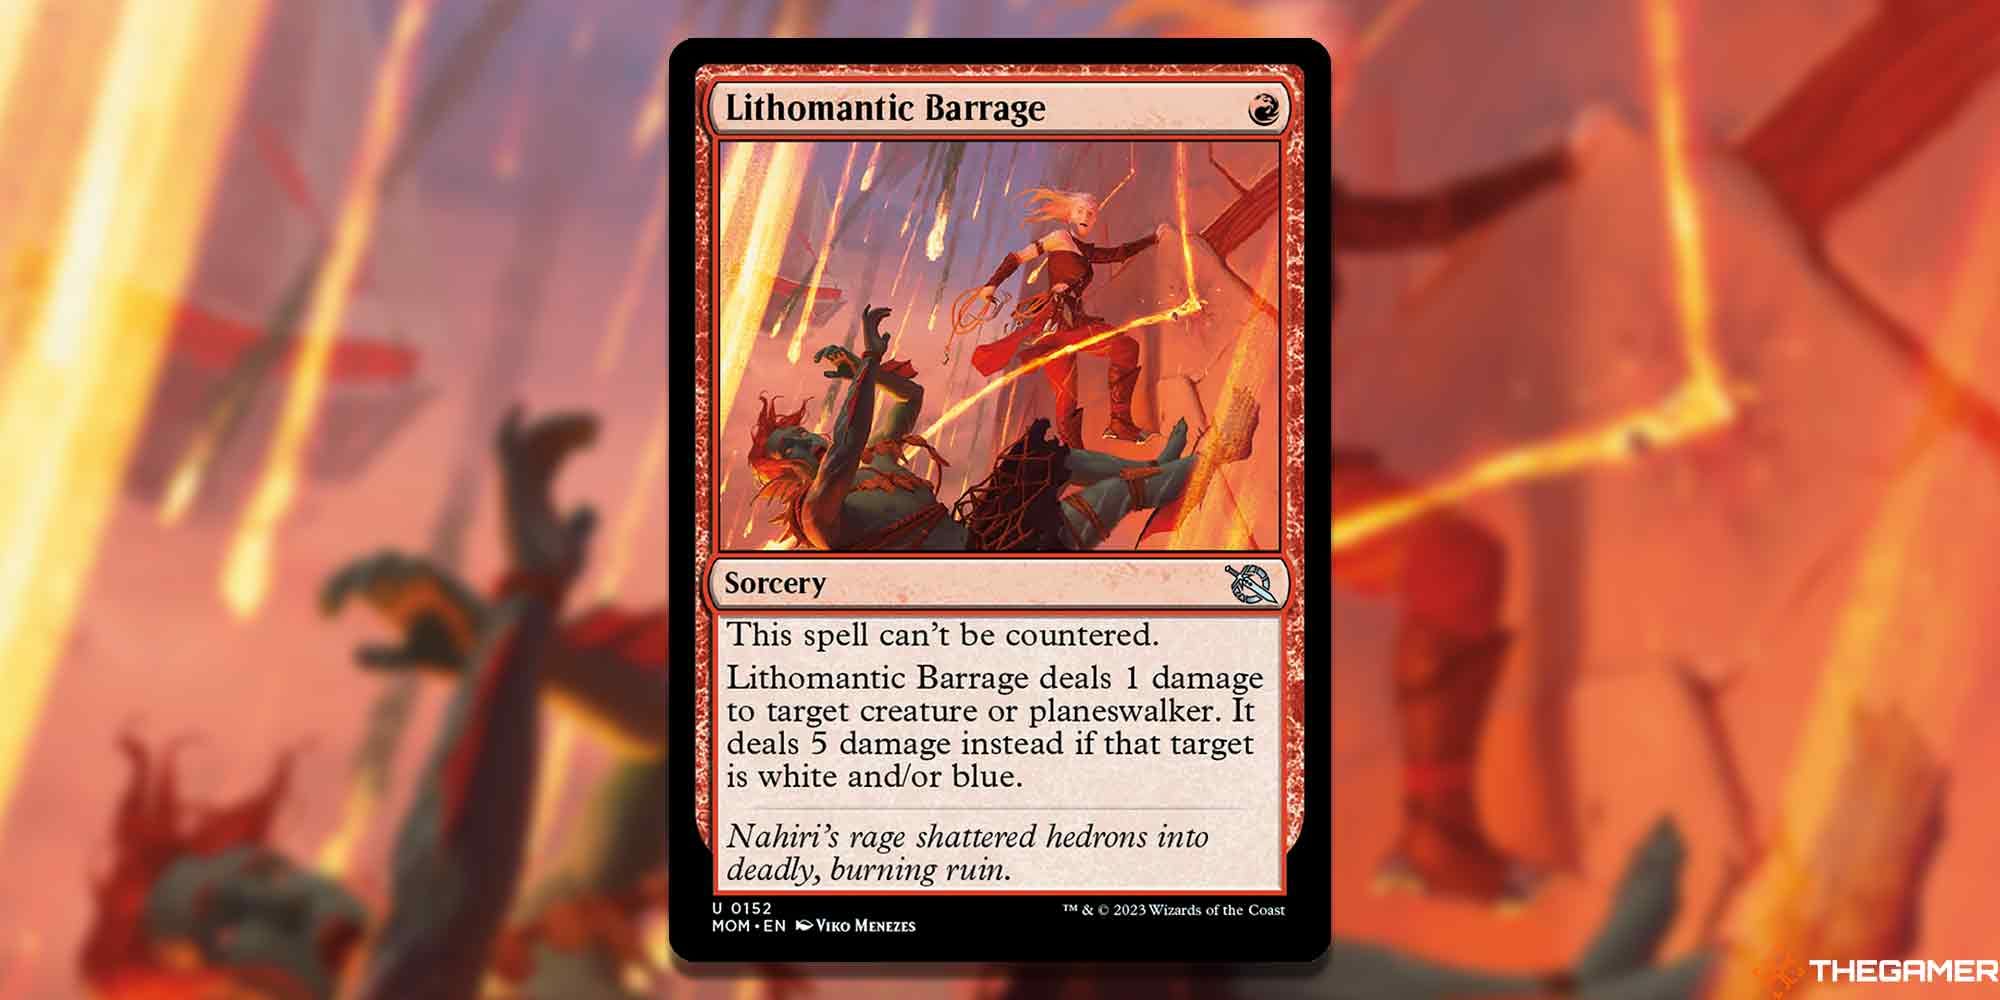 Lithomantic Barrage cards and art backgrounds from Magic the Gathering.